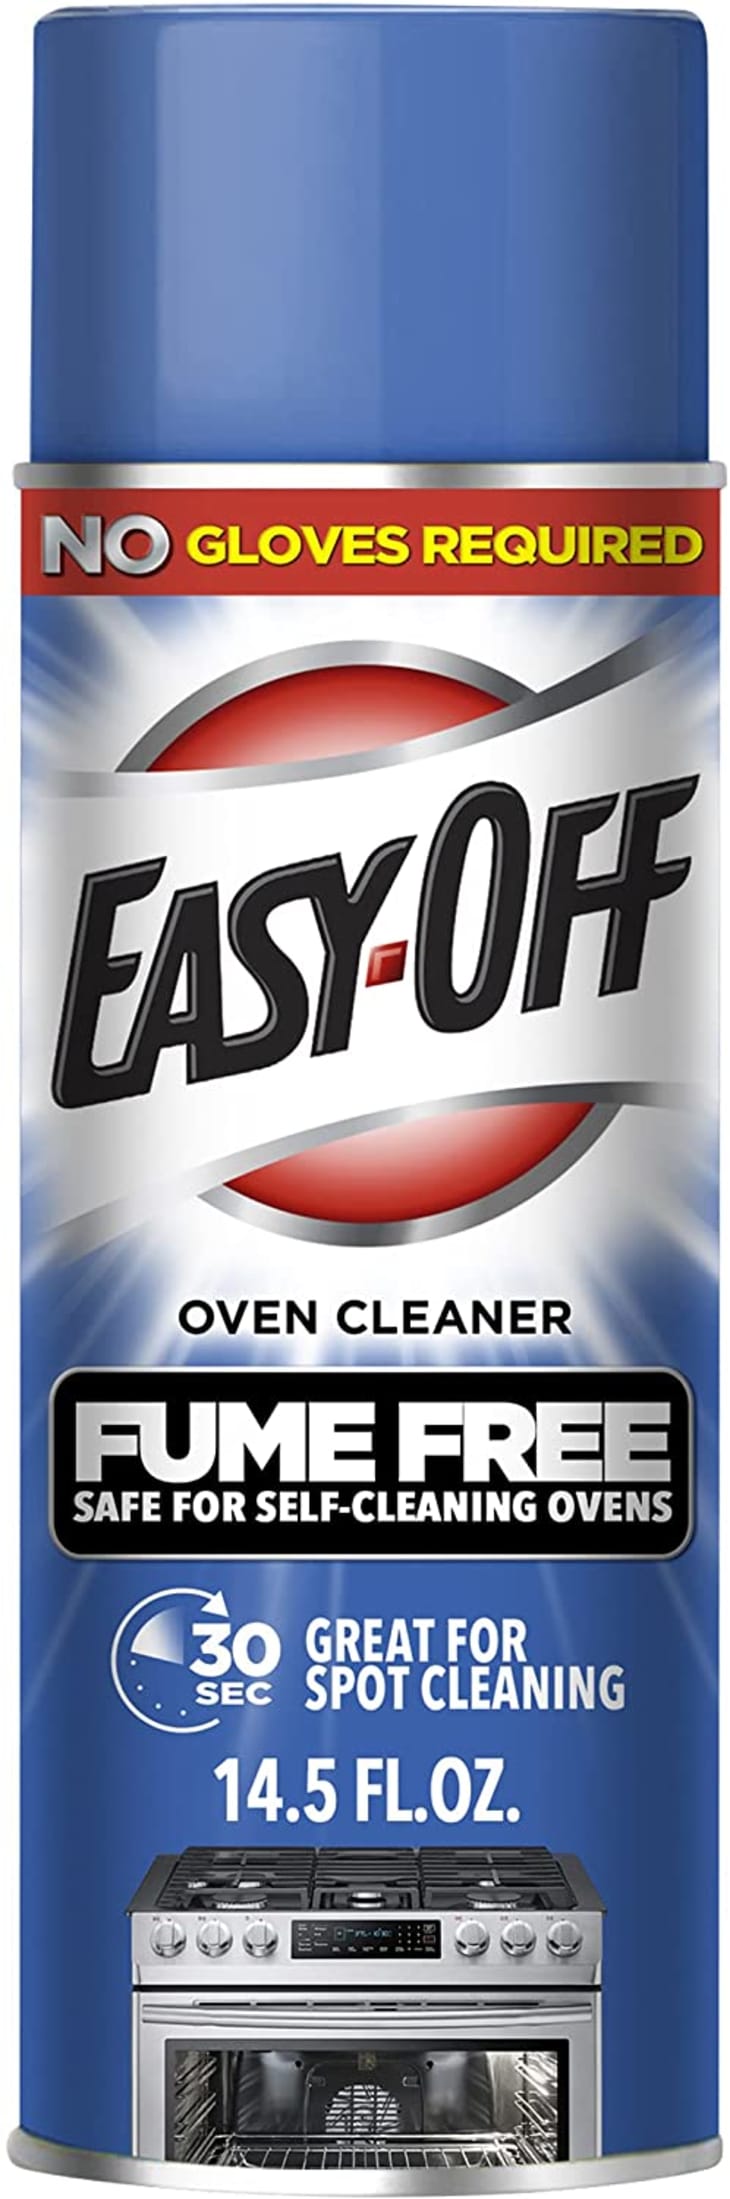 Easy Off Heavy Duty Oven and Grill Cleaner at Amazon